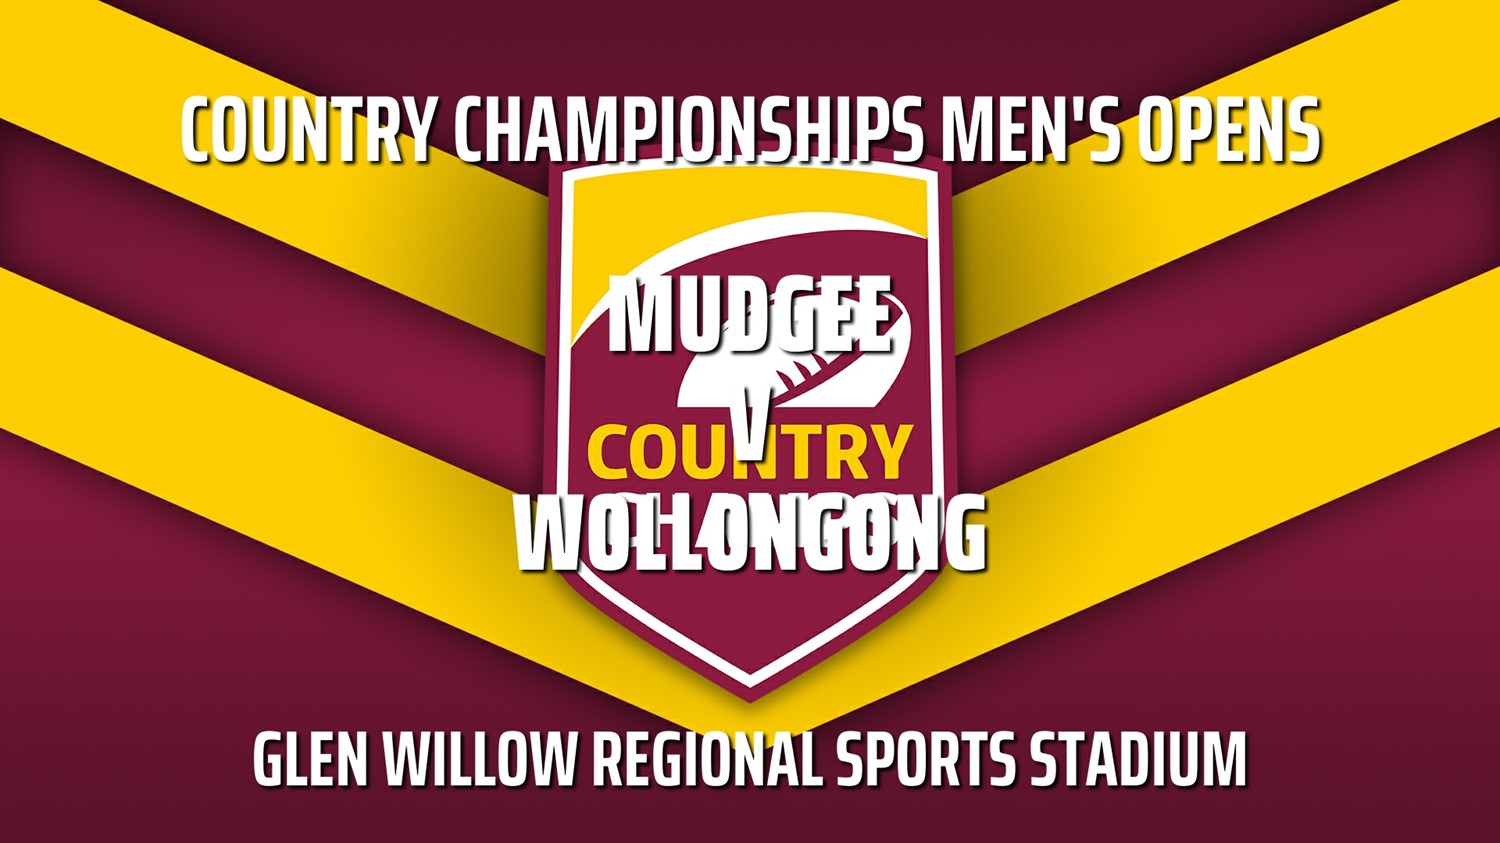 231014-Country Championships Men's Opens - Mudgee v Wollongong Devils Minigame Slate Image